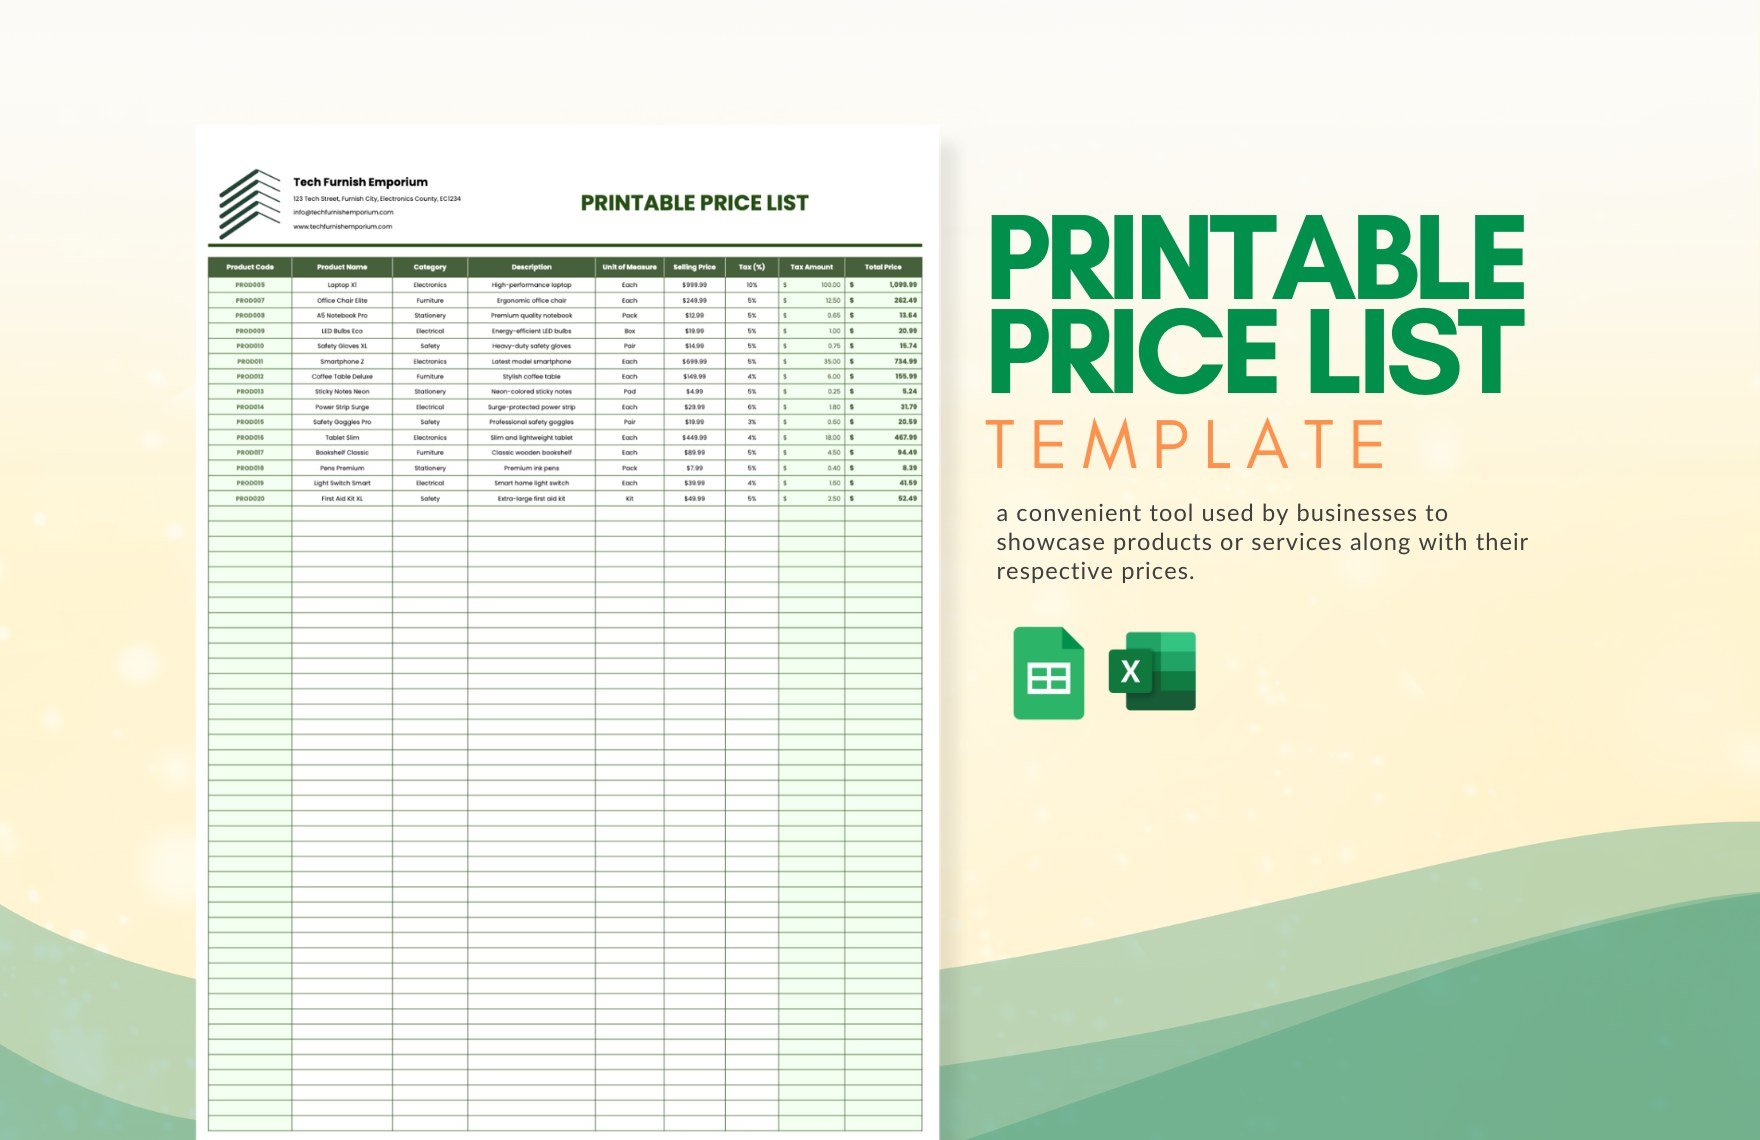 Printable Price List Template in Excel, Google Sheets